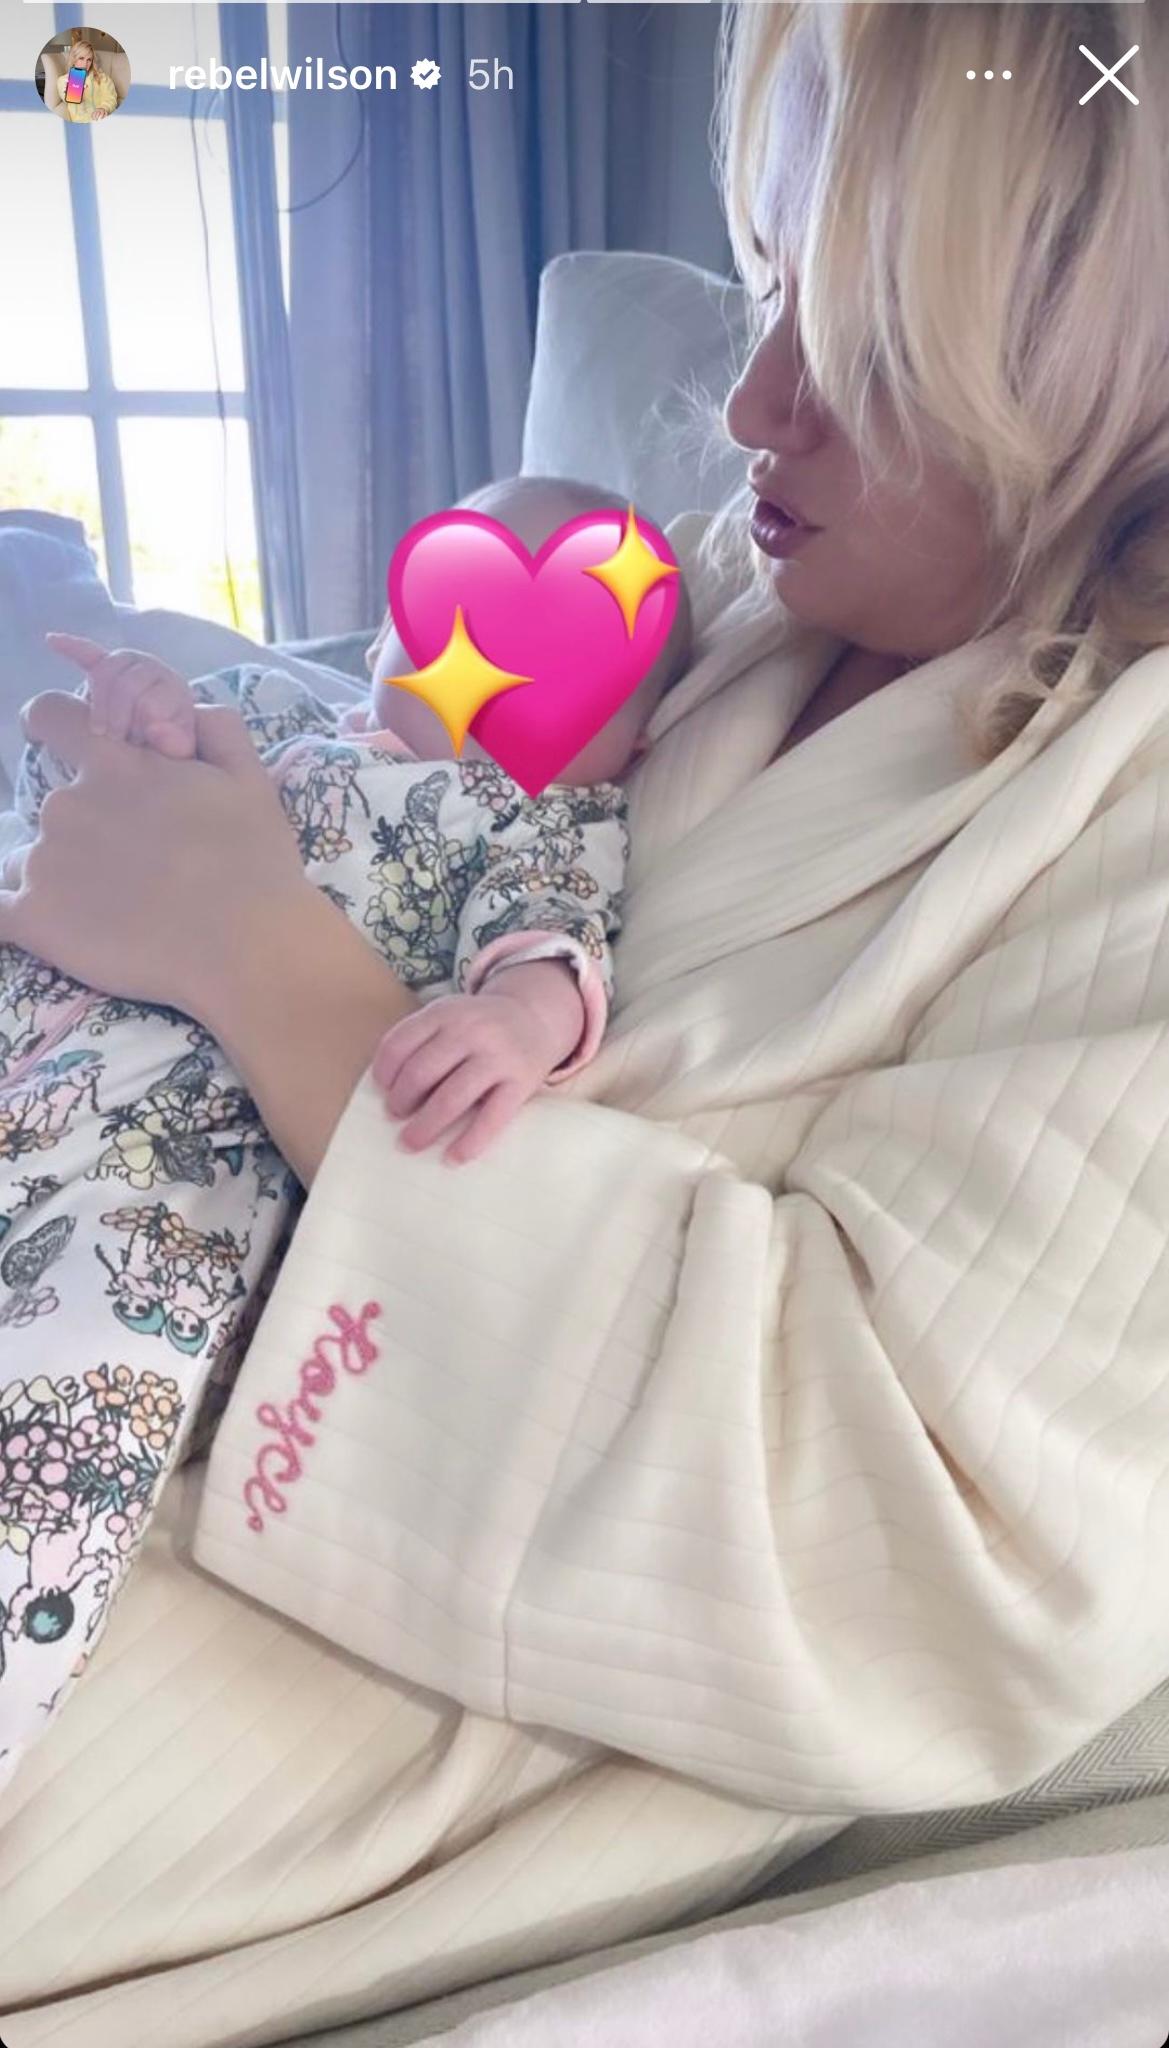 Rebel Wilson cuddles with daughter after birthday